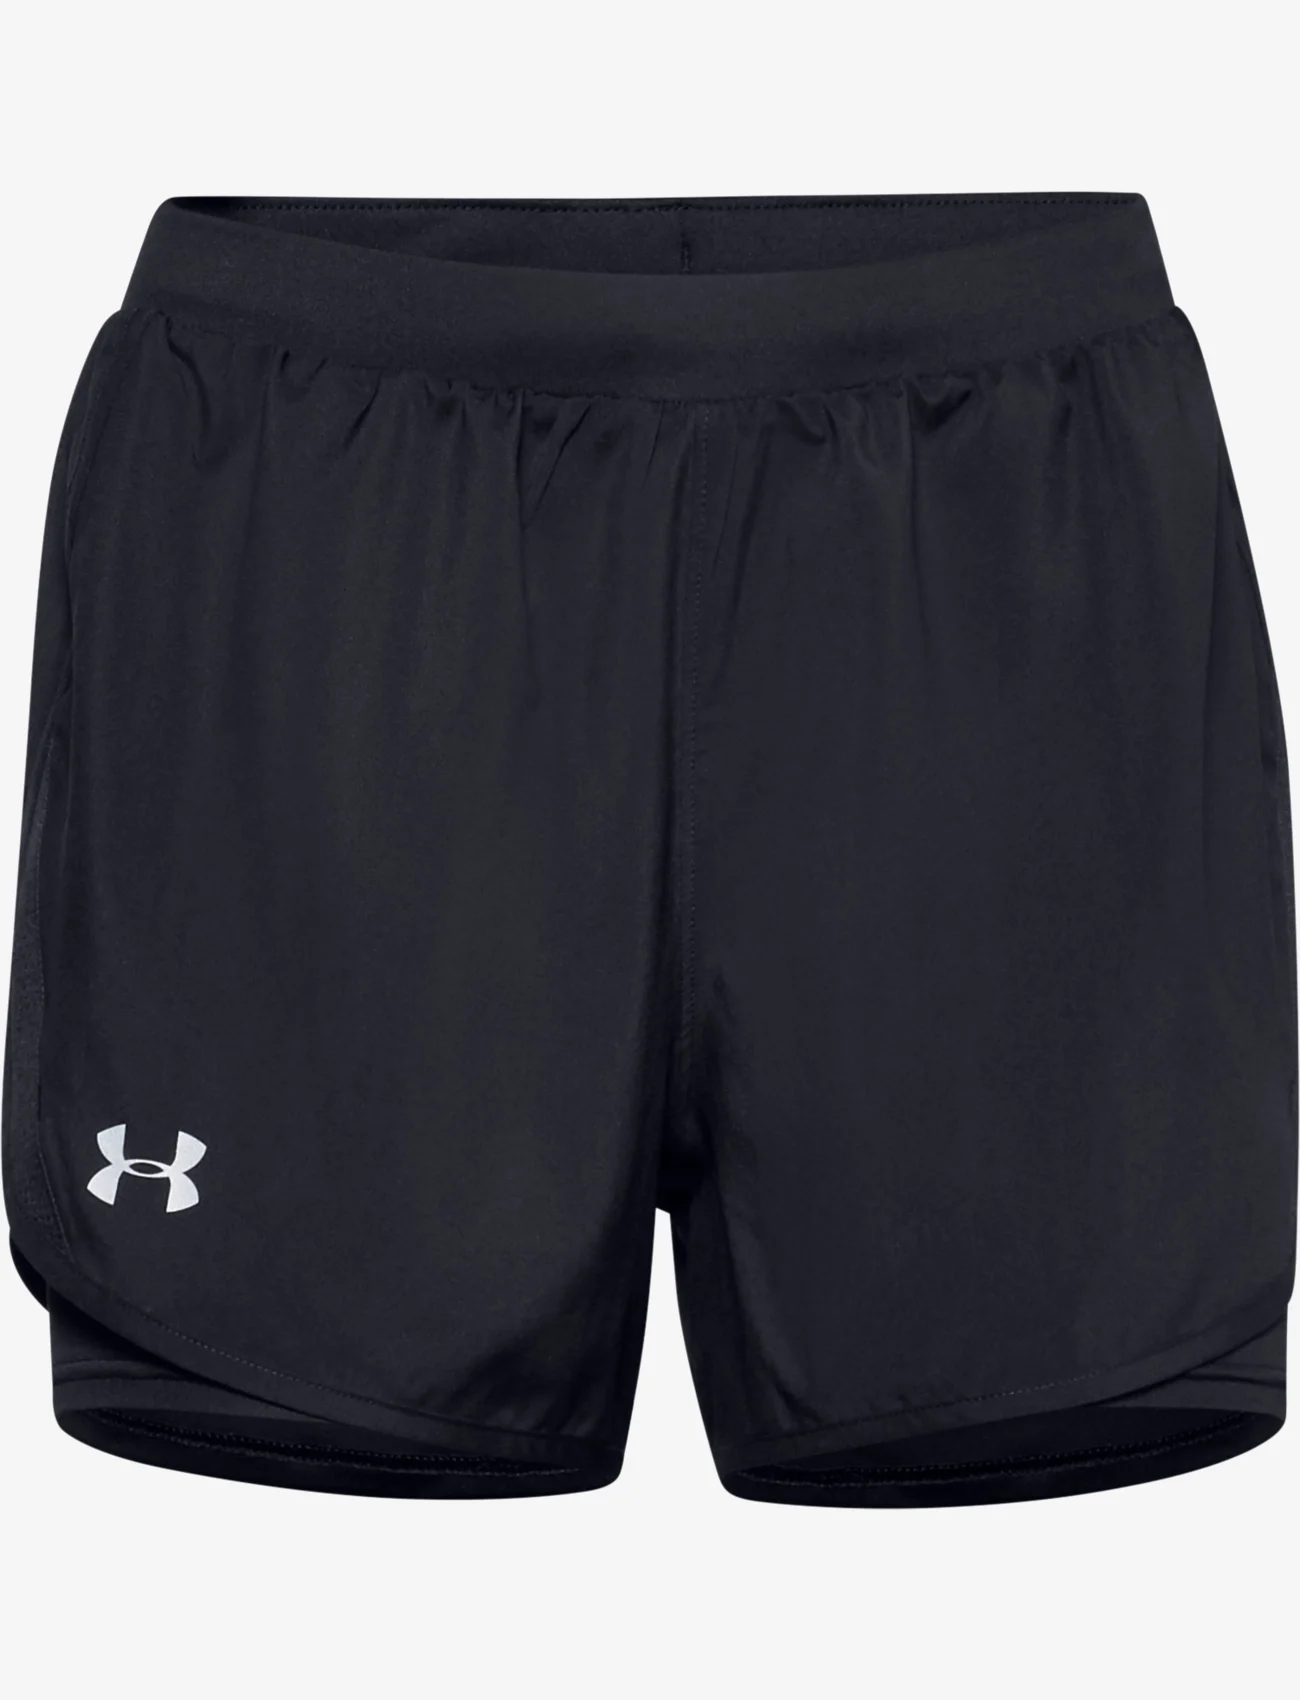 Under Armour - UA Fly By 2.0 2N1 Short - trainings-shorts - black - 0